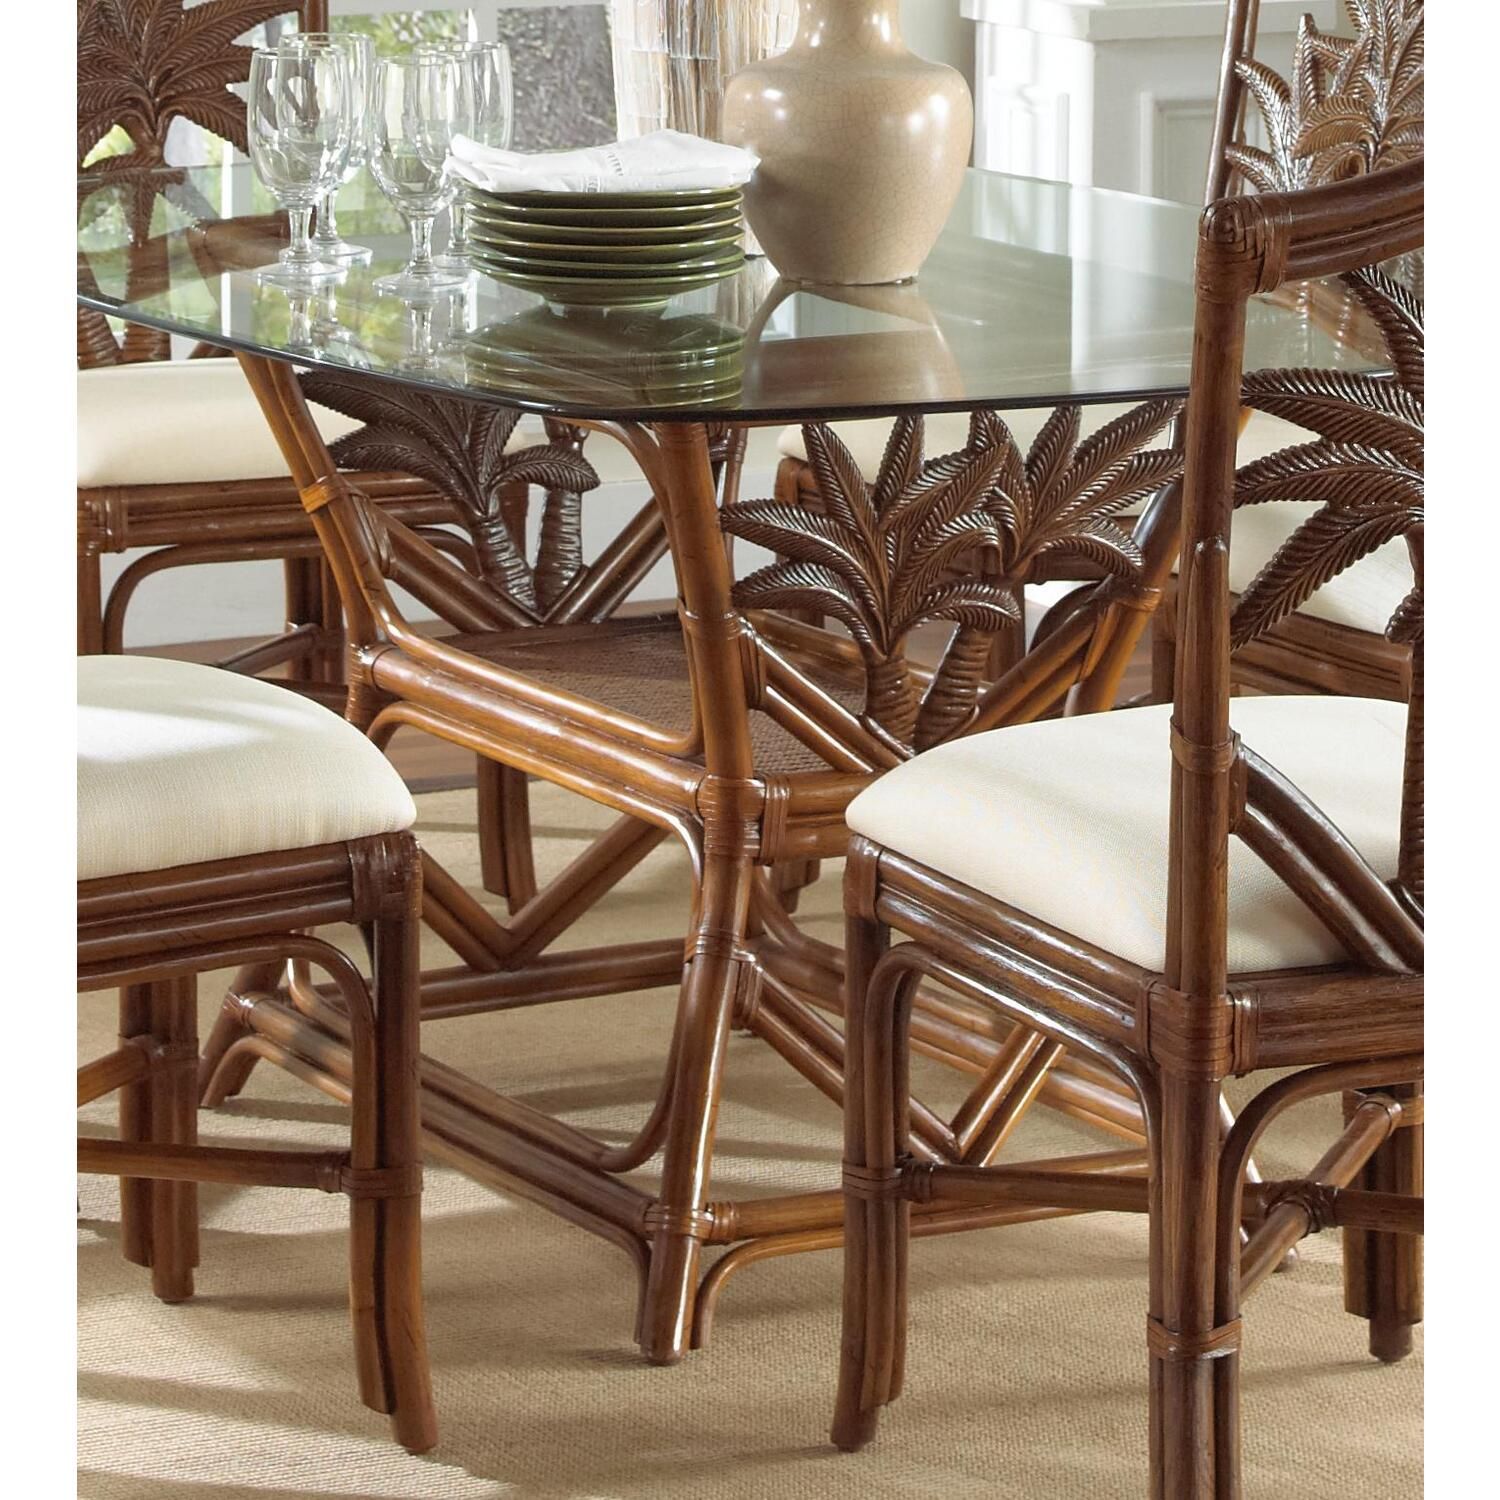 Rattan Dining Room Chairs – Californian Bungalow Interior Design Regarding Distressed Wicker Patio Dining Set (View 12 of 15)